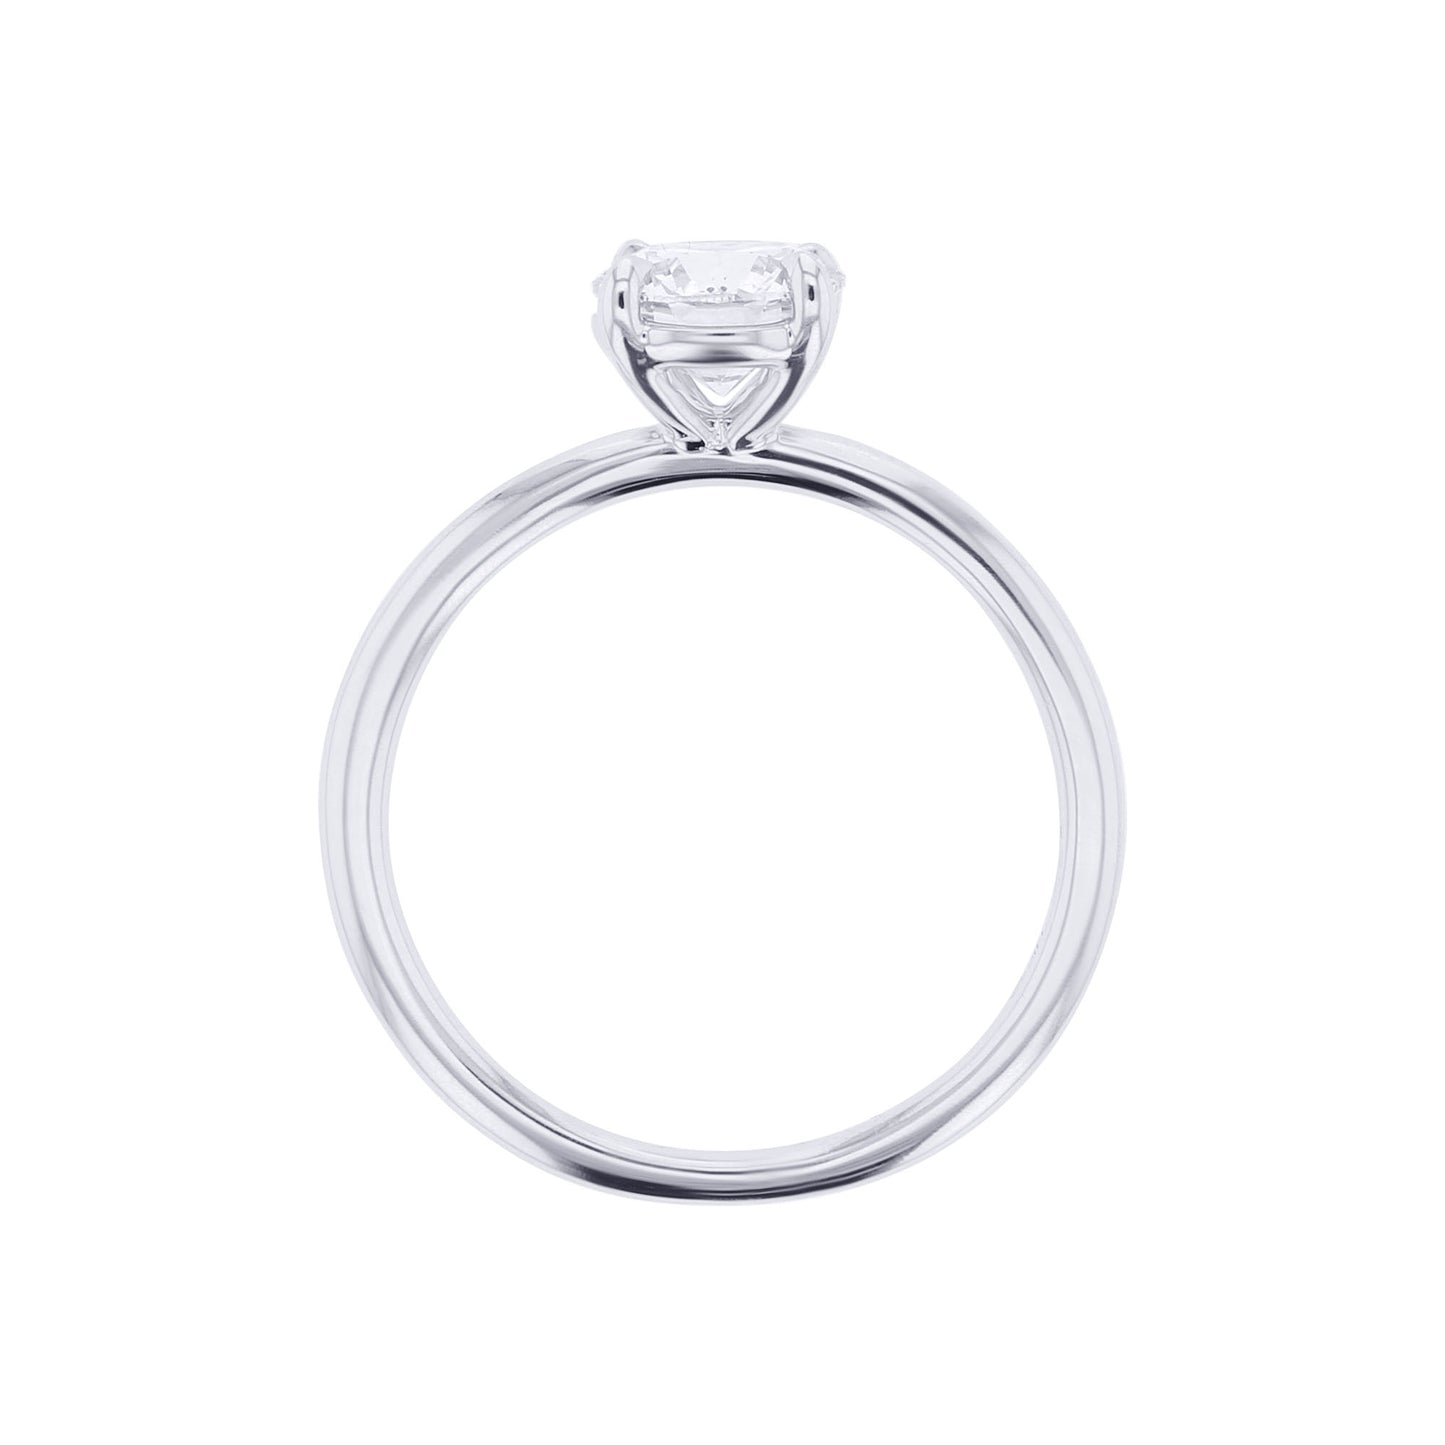 Ember Round Ready for Love Diamond Engagement Ring 1ct